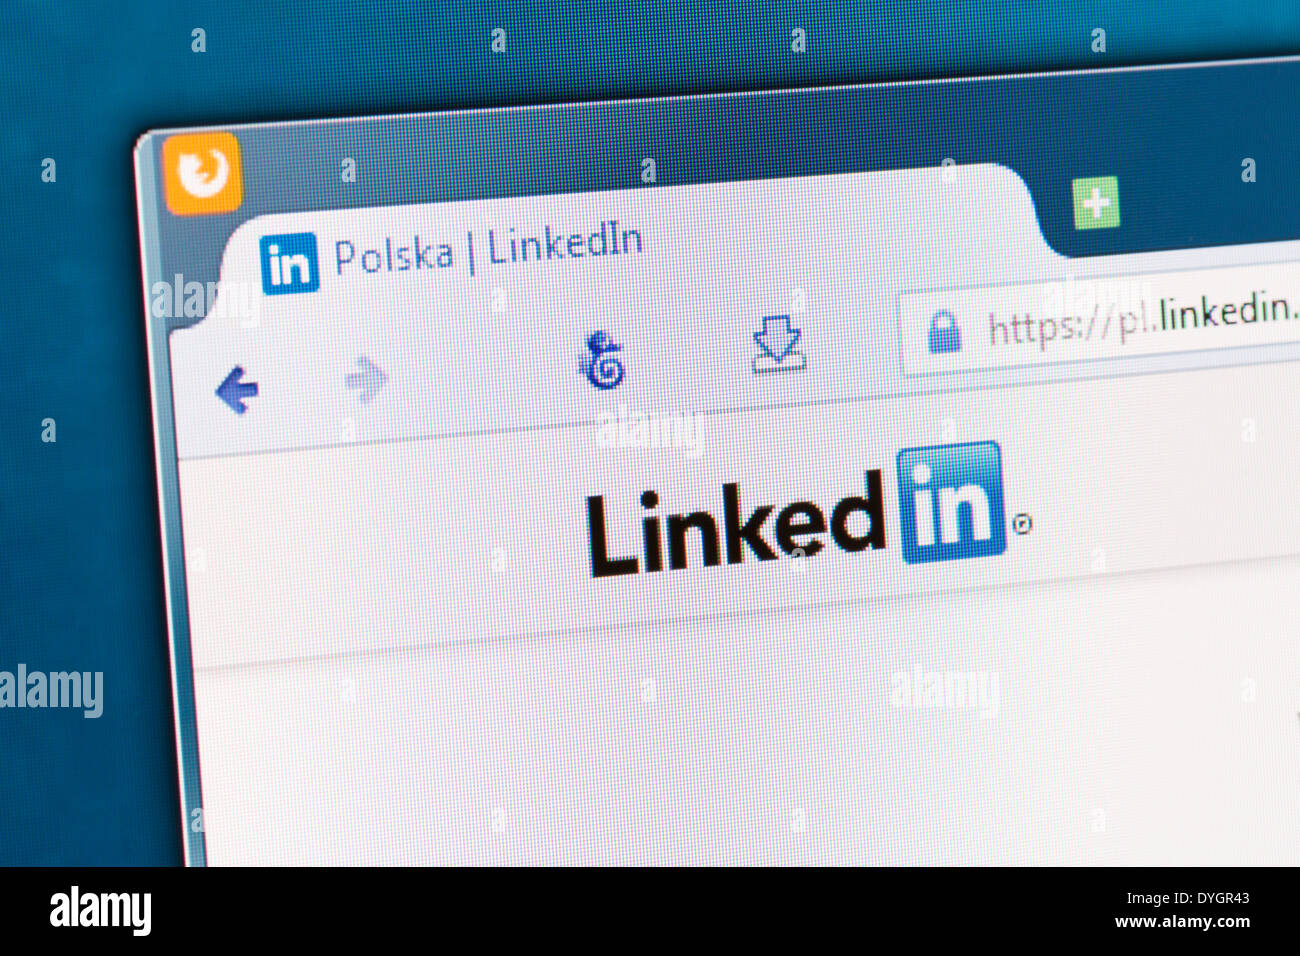 BELCHATOW, POLAND - APRIL 11, 2014: Photo of Linkedin social network homepage on a monitor screen. Stock Photo